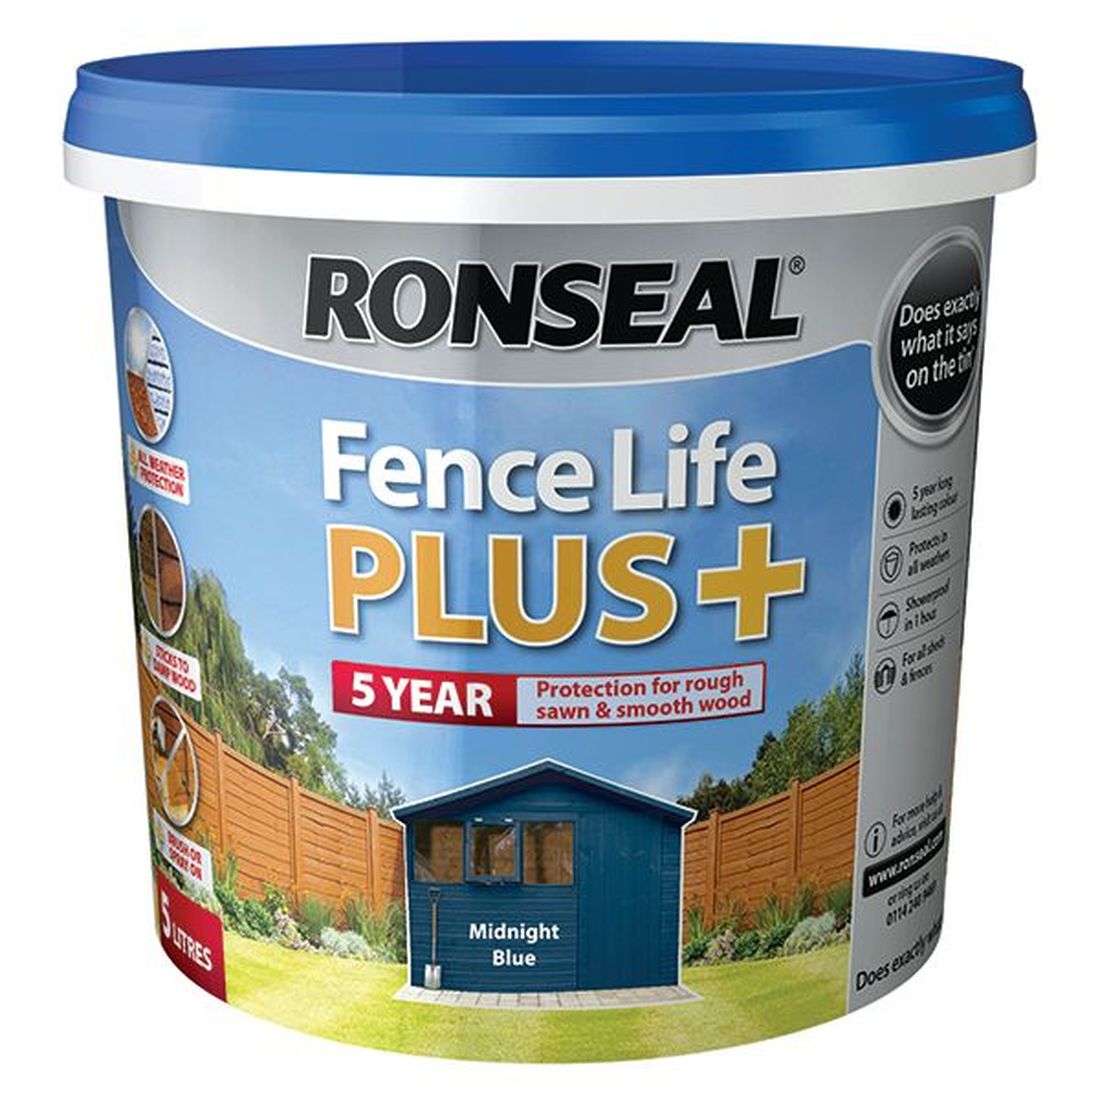 Ronseal Fence Life Plus+ Midnight Blue 5 litre                                          